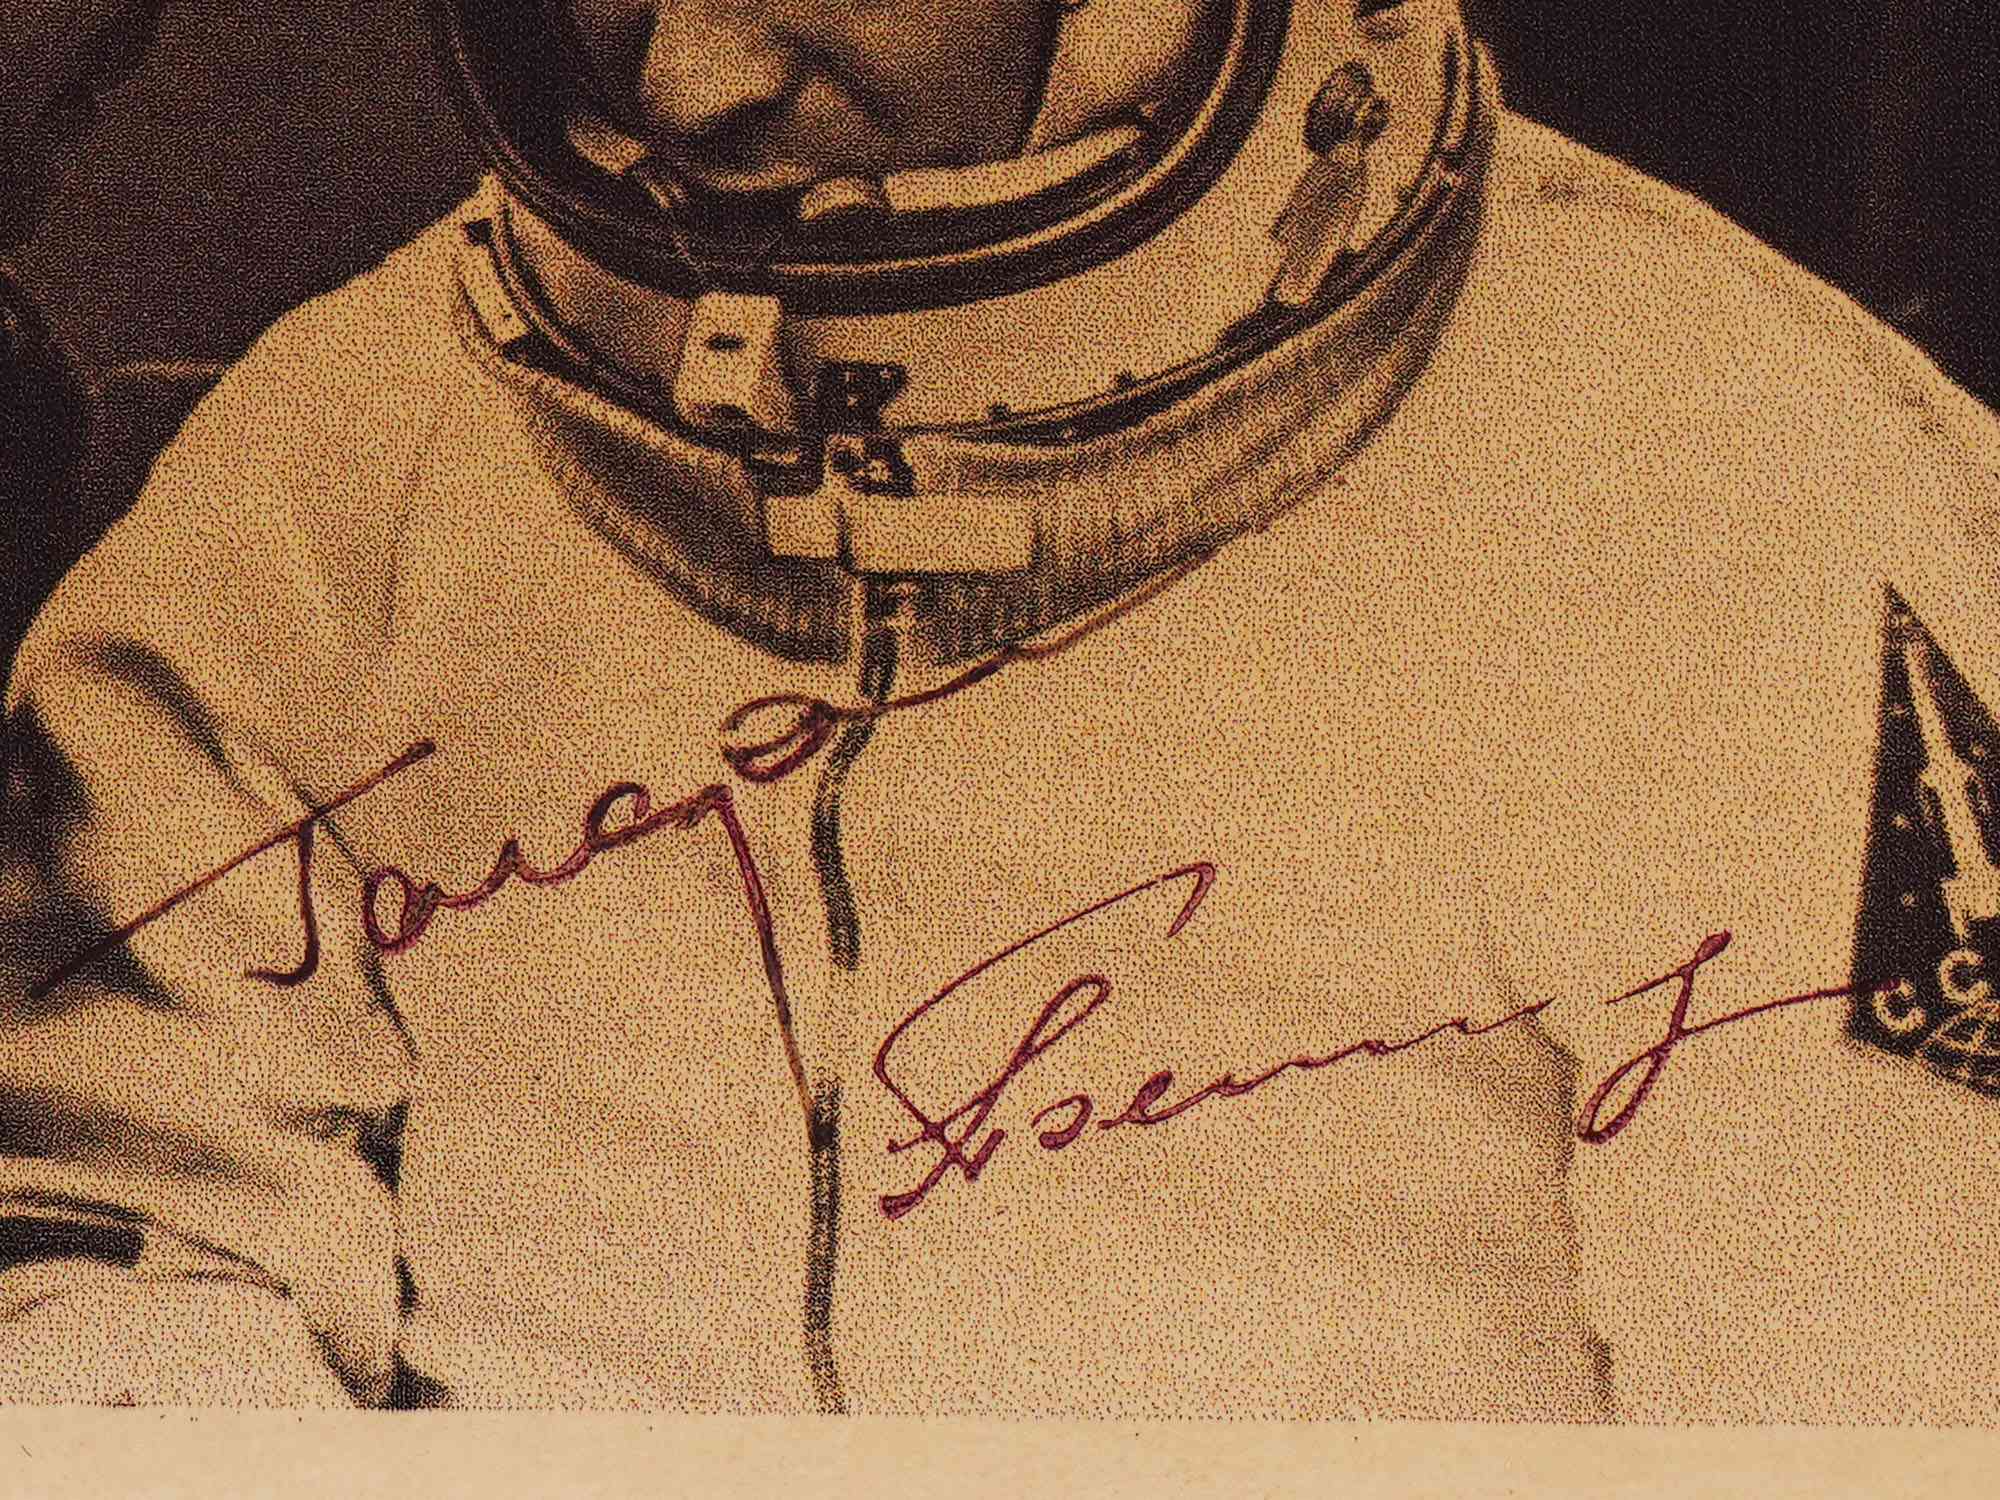 SOVIET PHOTO AUTOGRAPHED BY GAGARIN AND BELYAYEV PIC-1